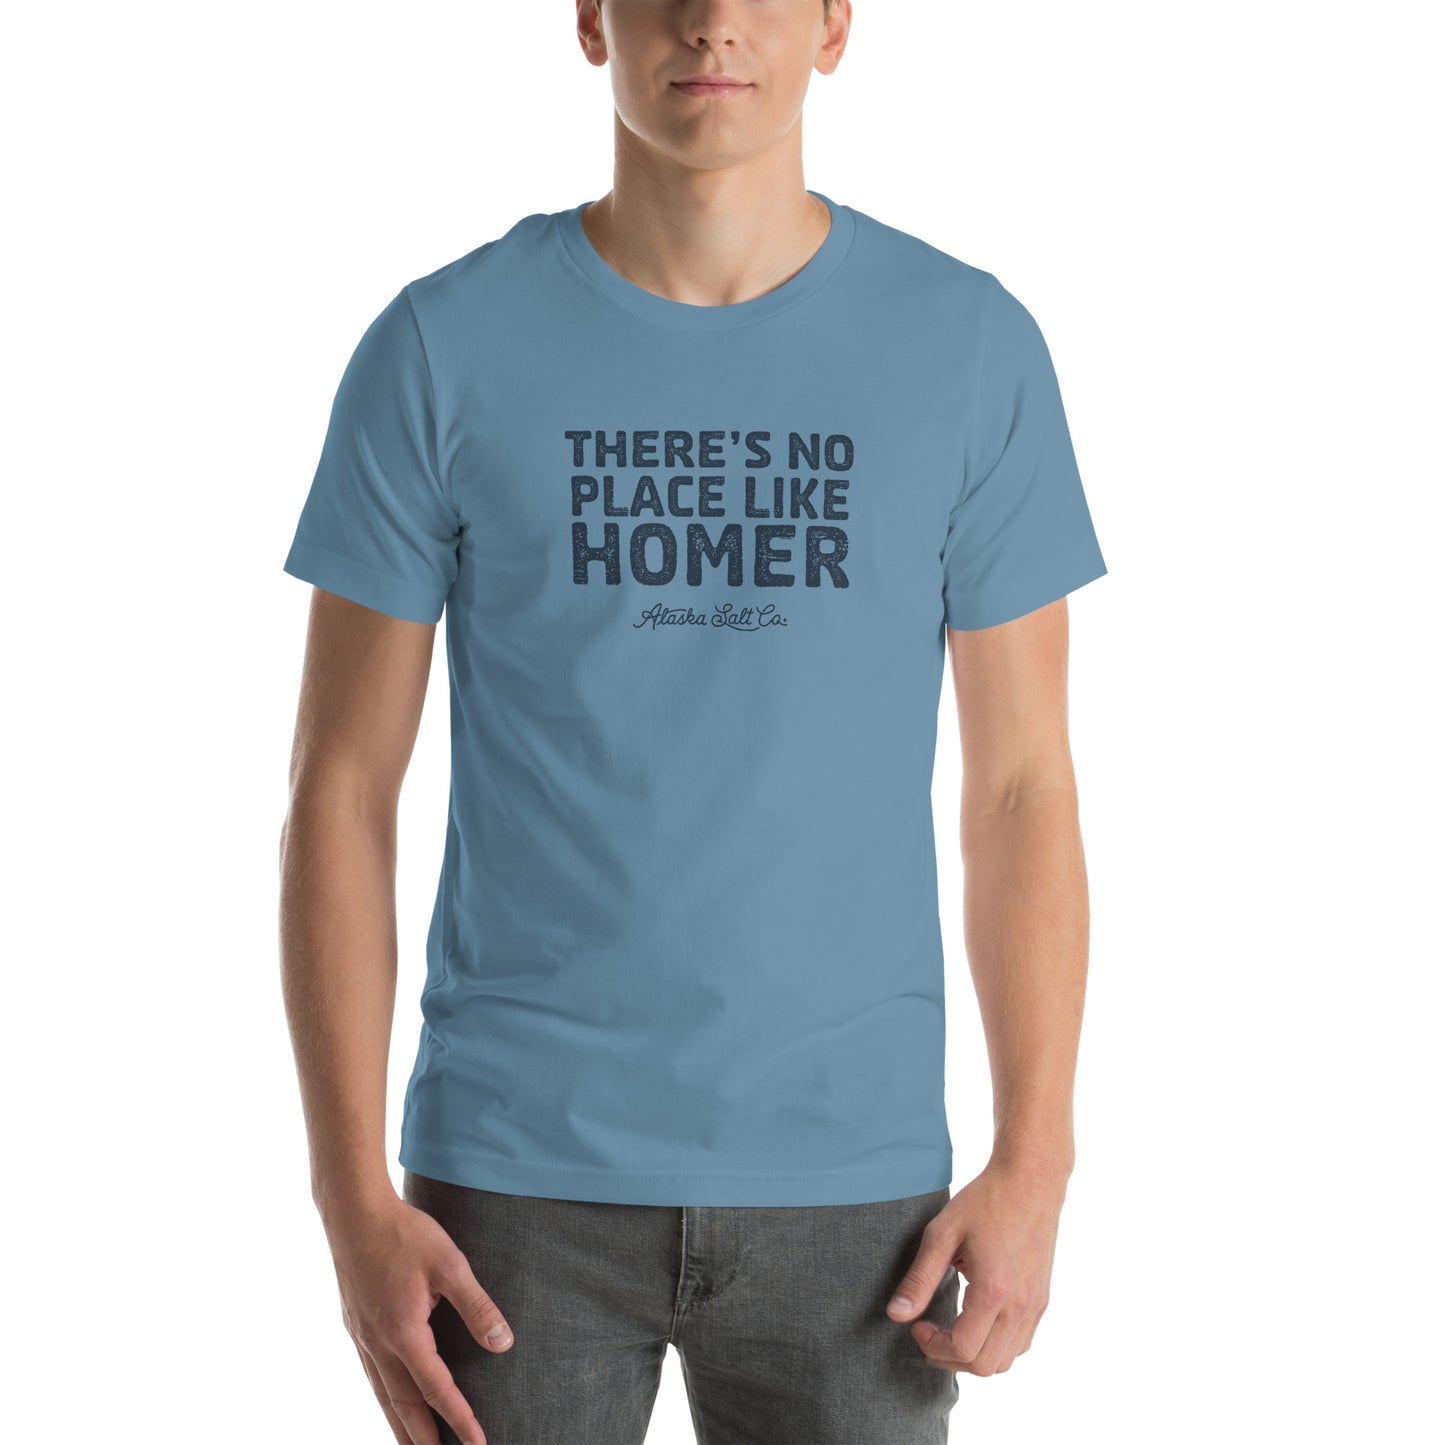 There's No Place Like Homer tee